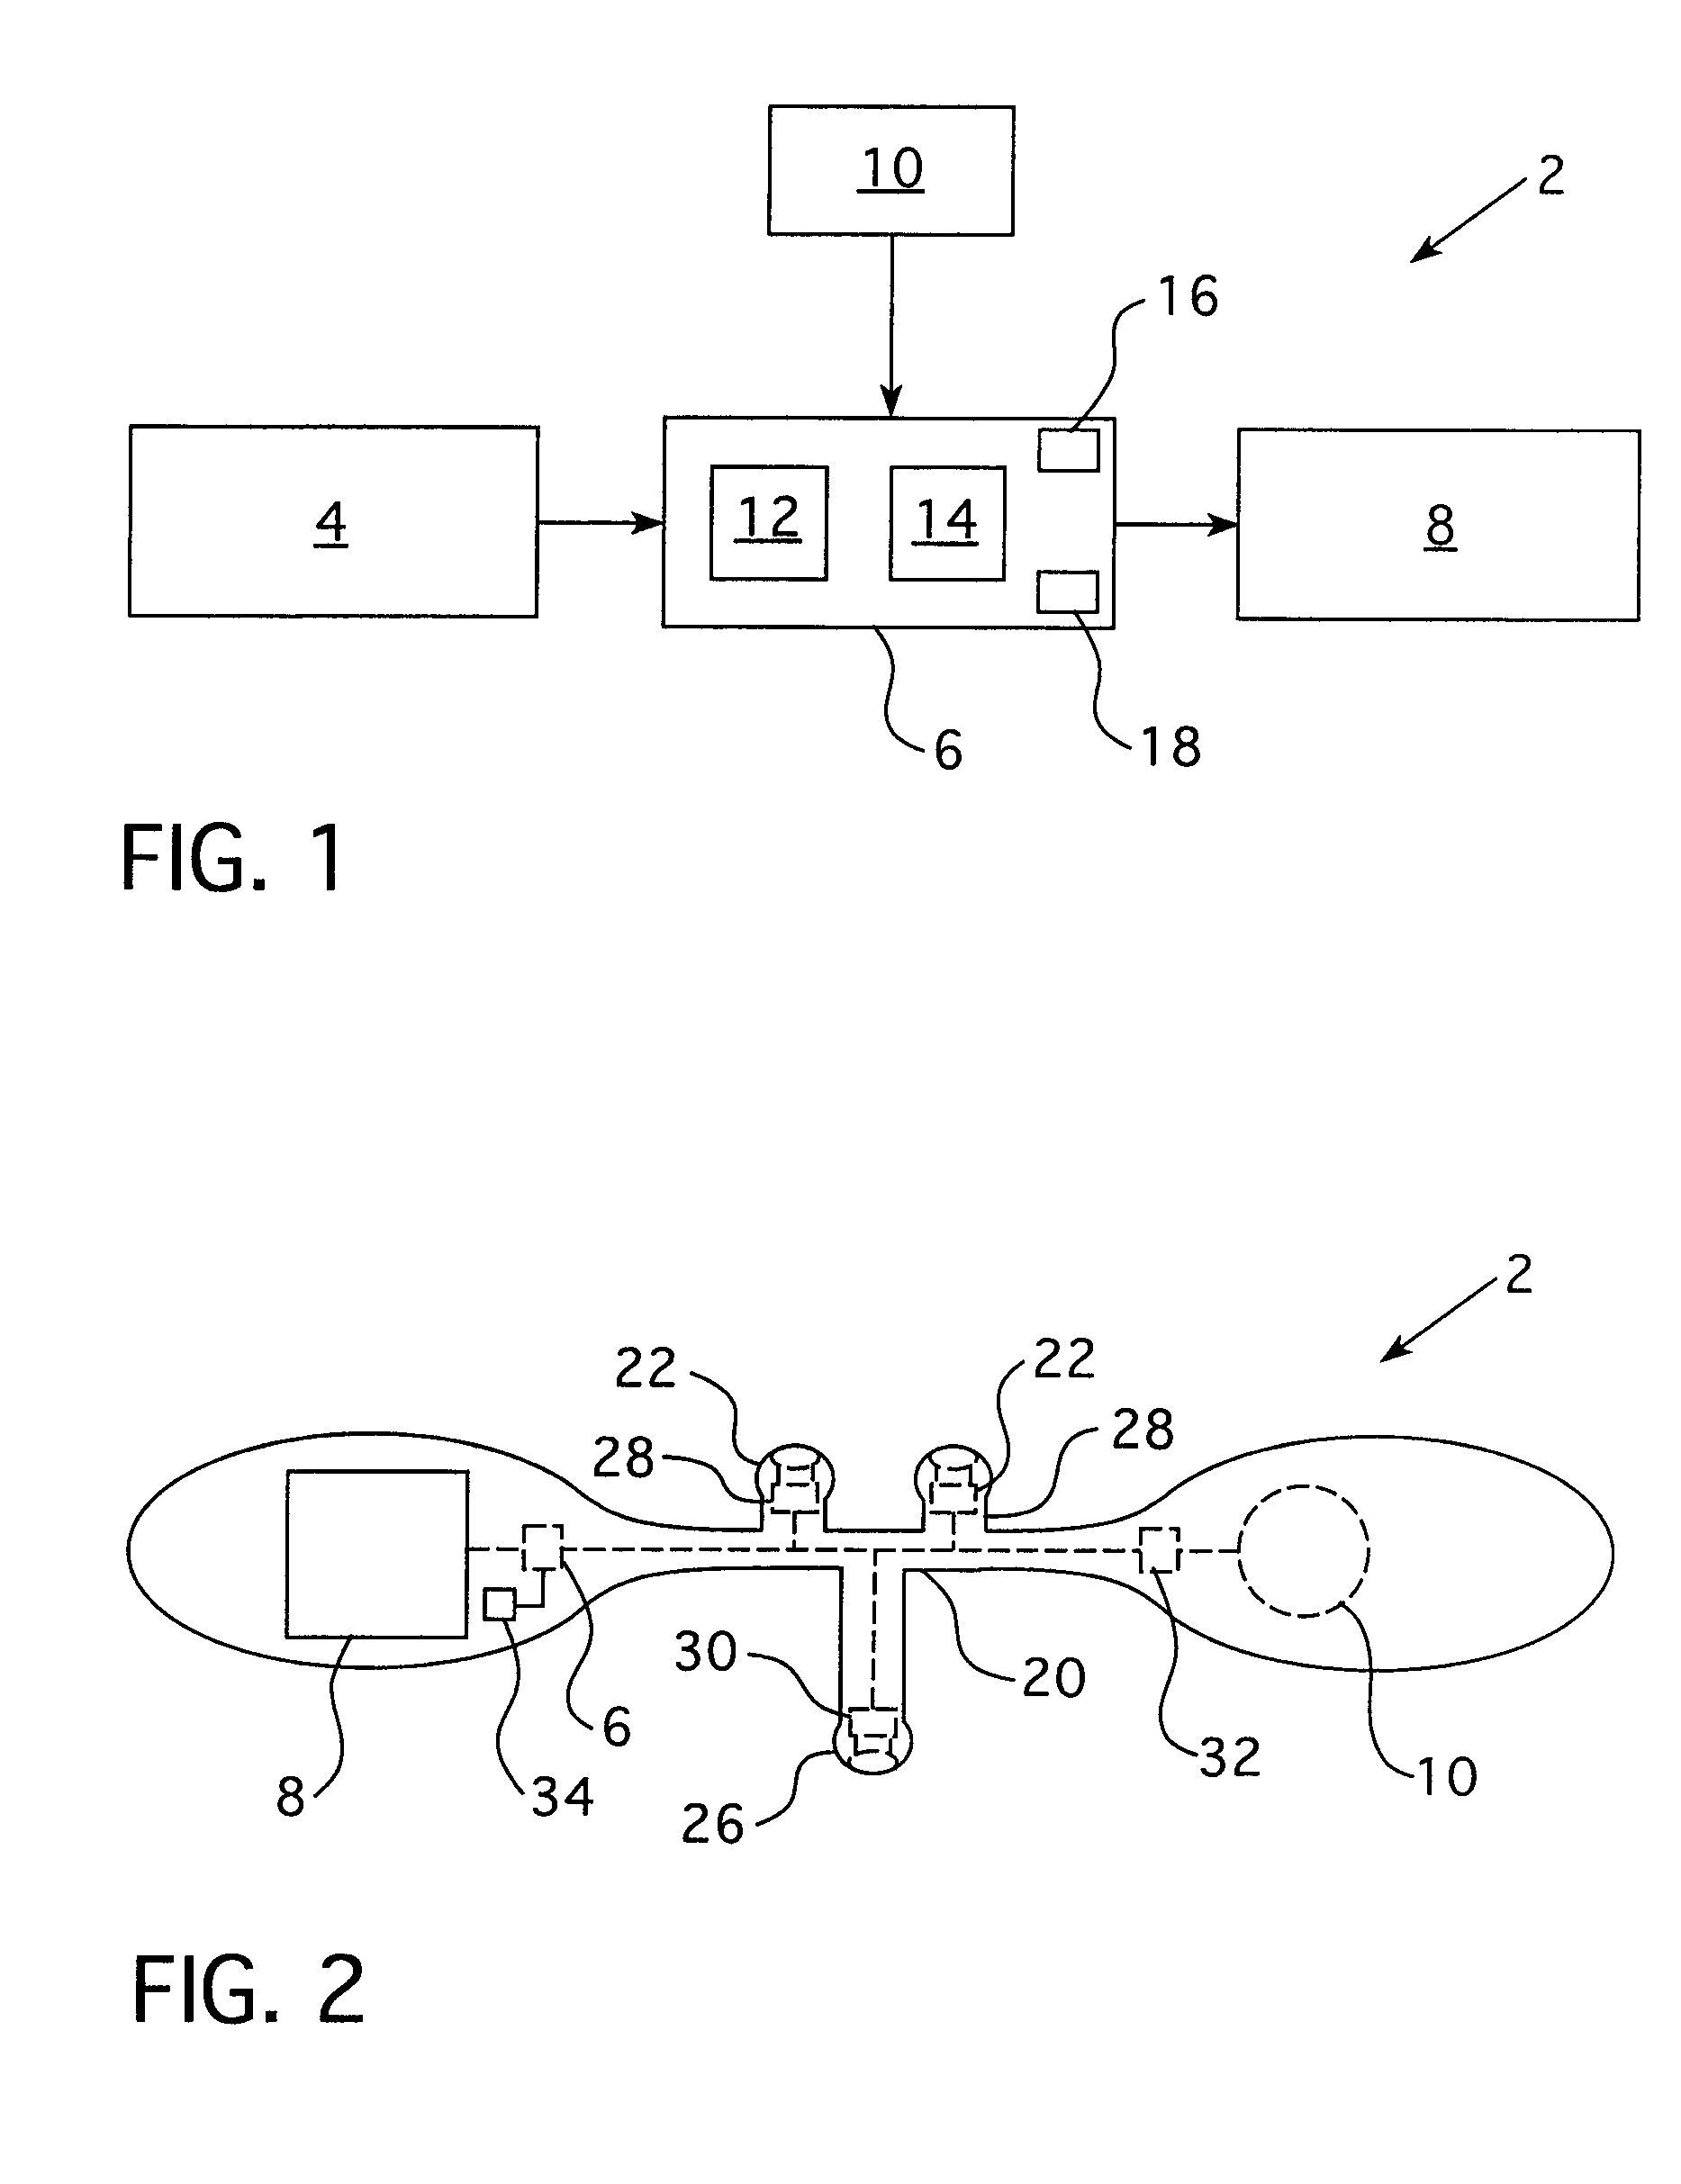 Disordered breathing monitoring device and method of using same including a study status indicator